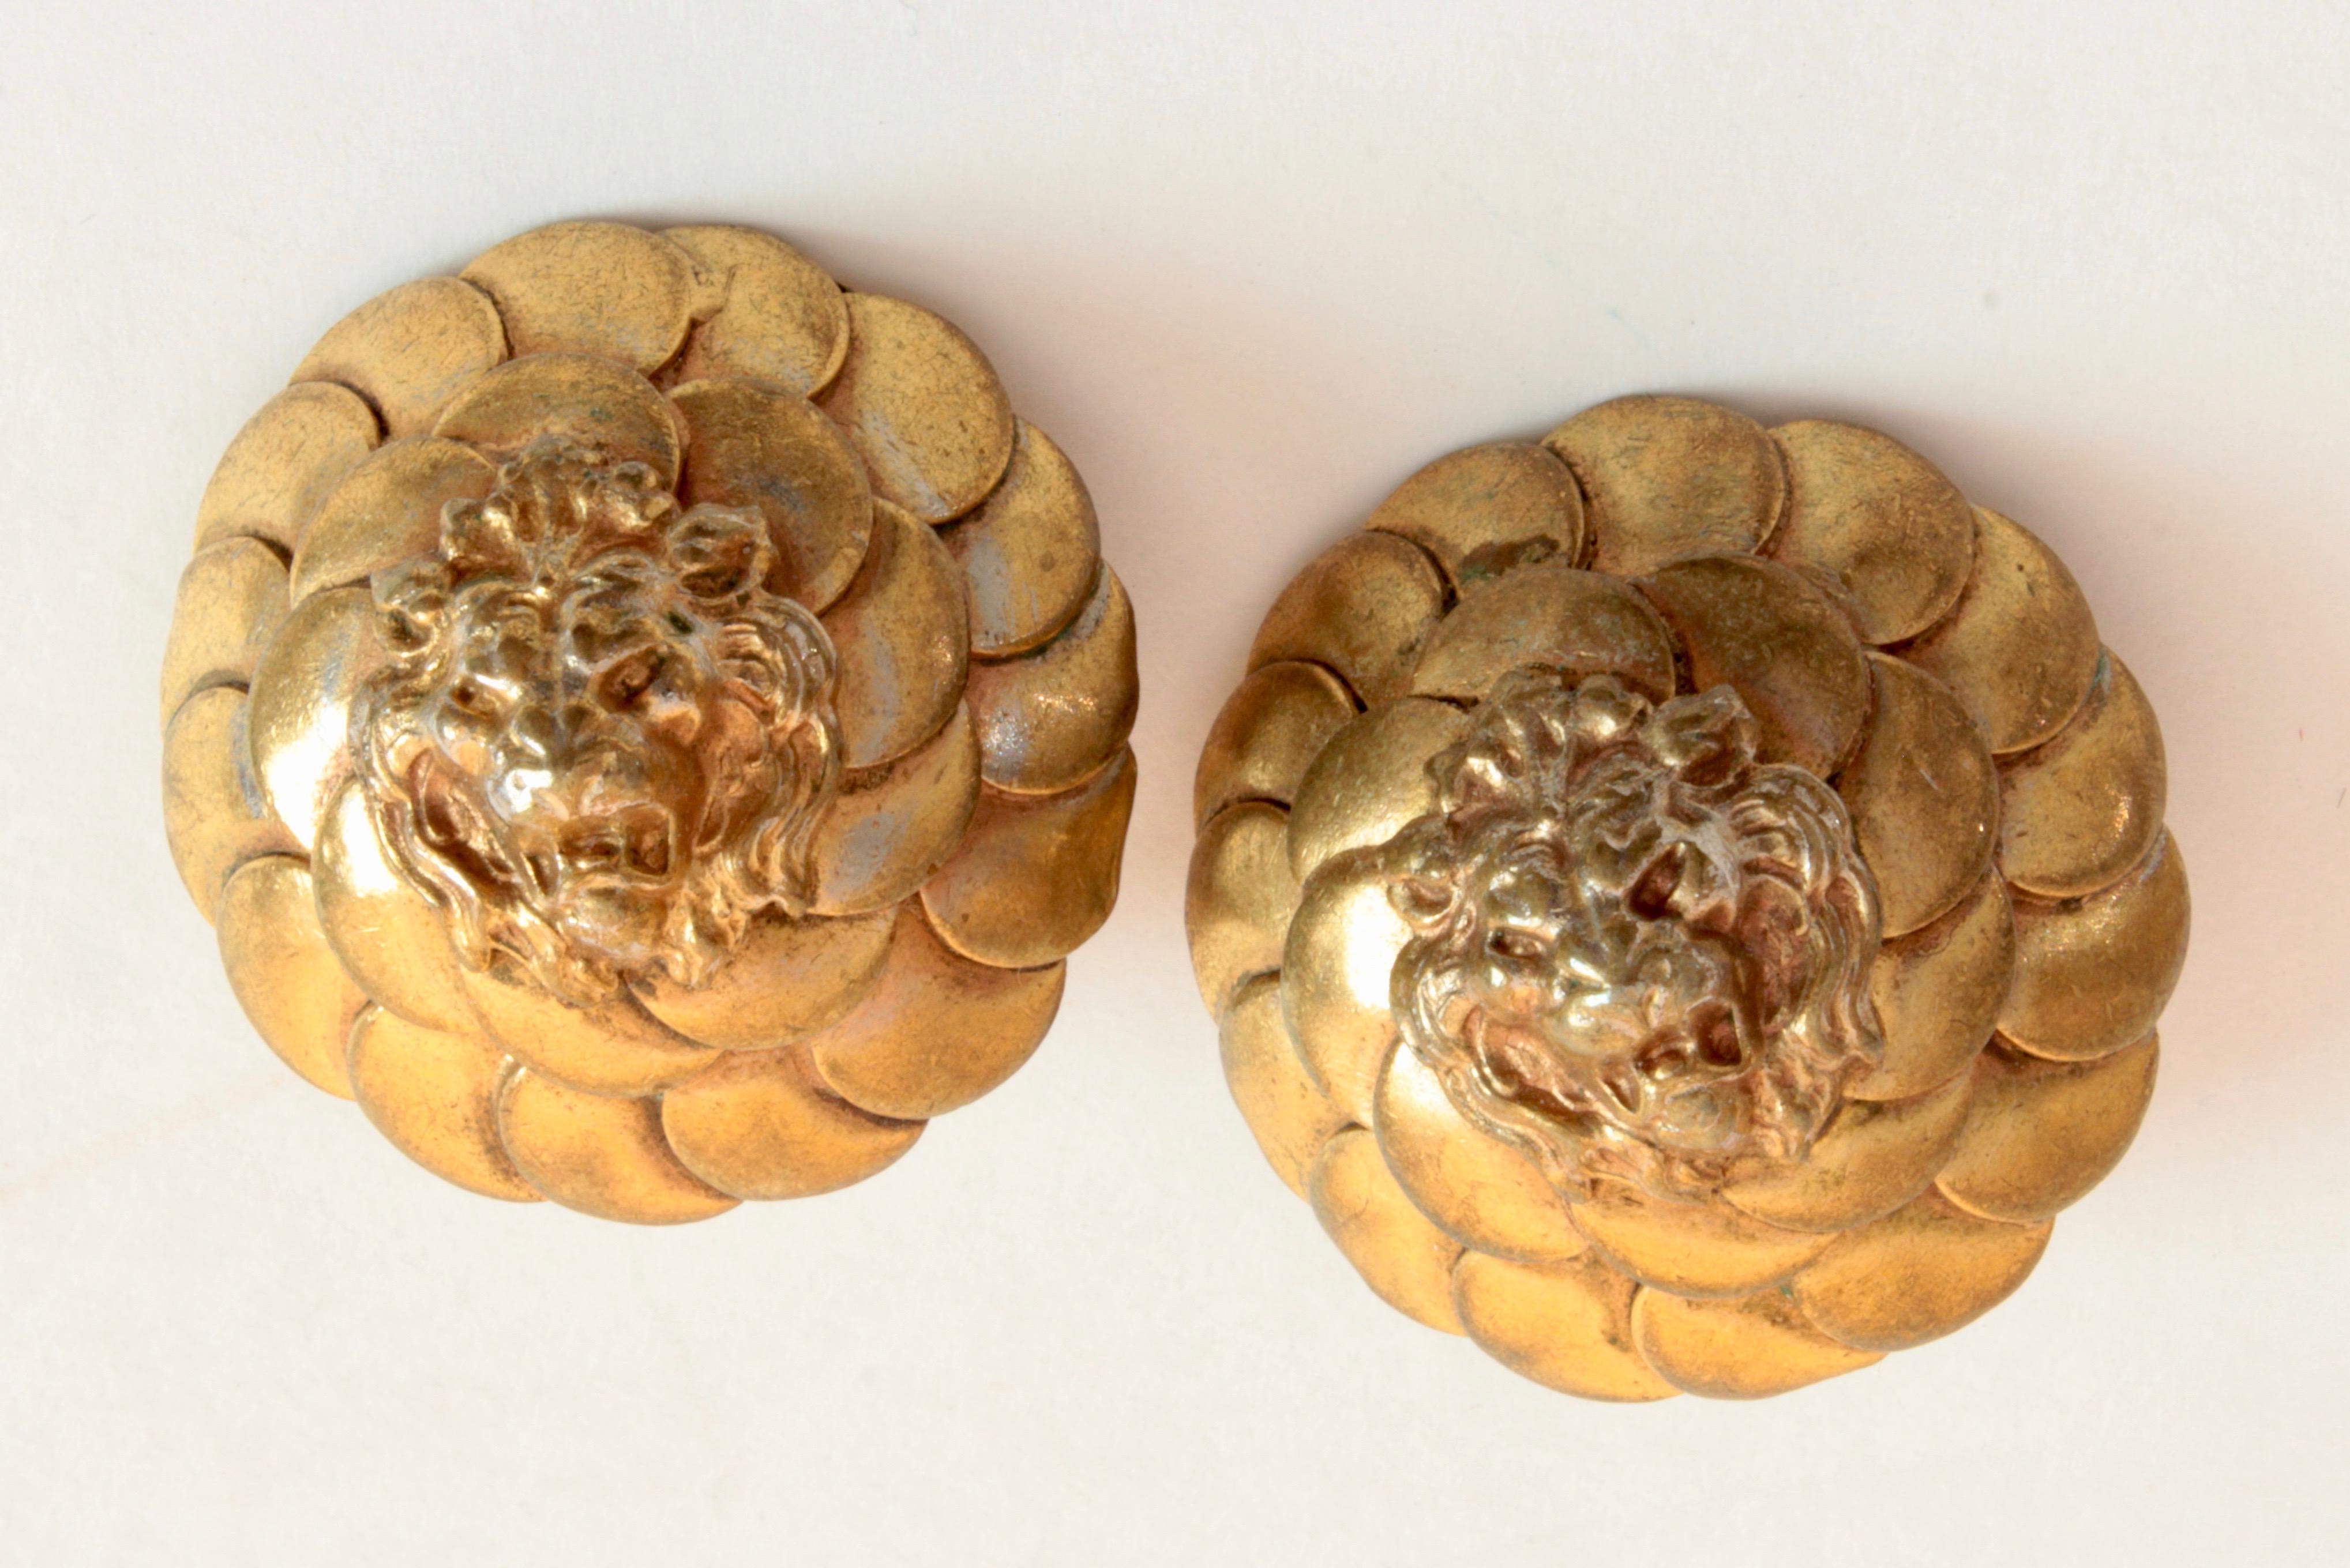 These fabulous snarling lion head earrings were made by Chanel in the 1970s.  Acquired from the estate of a Palm Beach retiree who once worked for Chanel in Paris, they feature snarling lion heads against a layered pattern of gold metal.  Per the